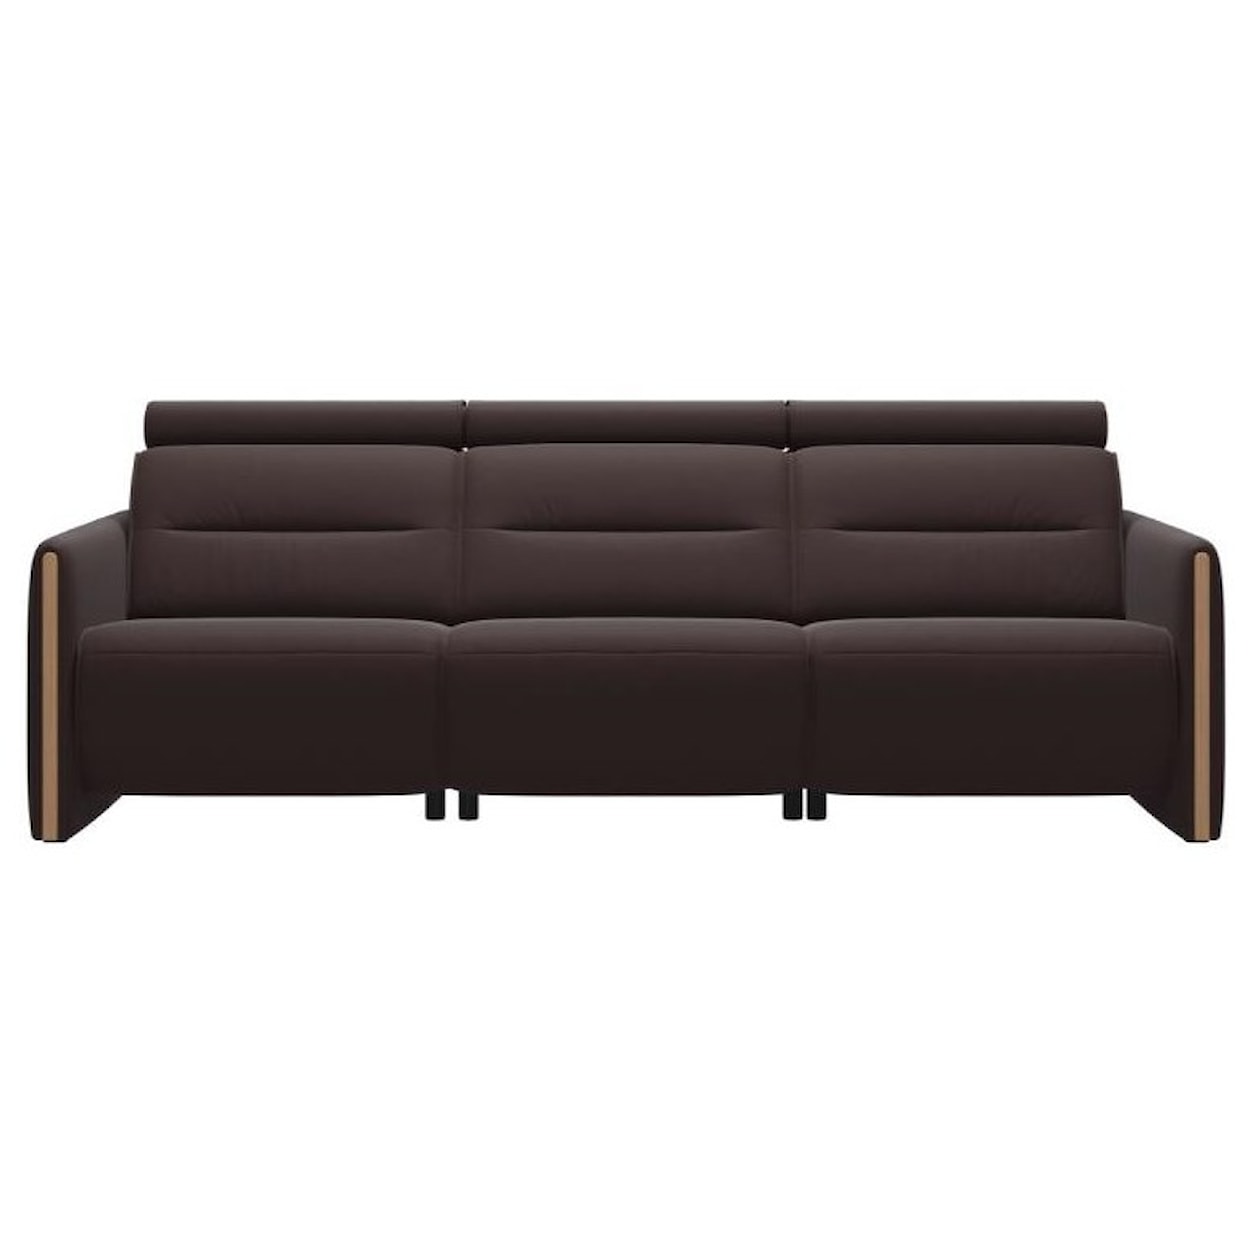 Stressless Emily Power 3-Seat Sofa with Wood Arms